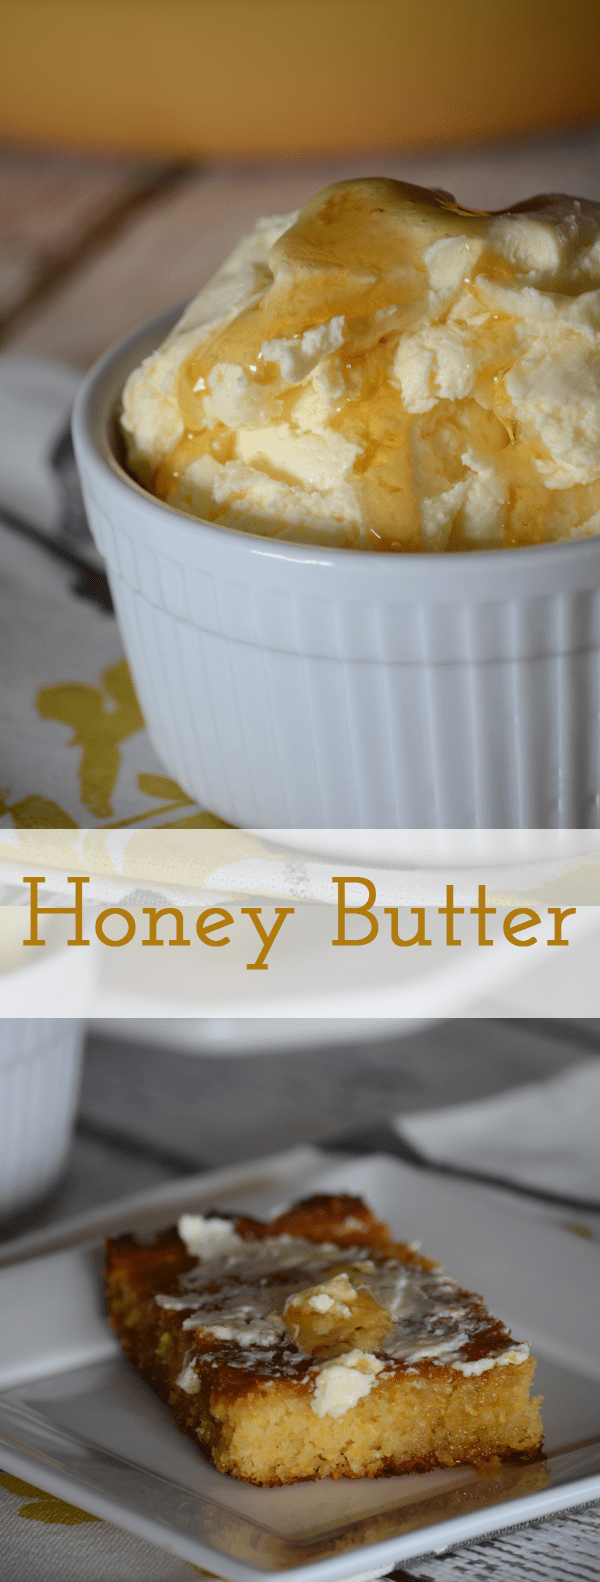 Homemade honey butter recipe! This recipe is so easy and is perfect to put on top of fresh breads! Make a batch today and have it for the week!